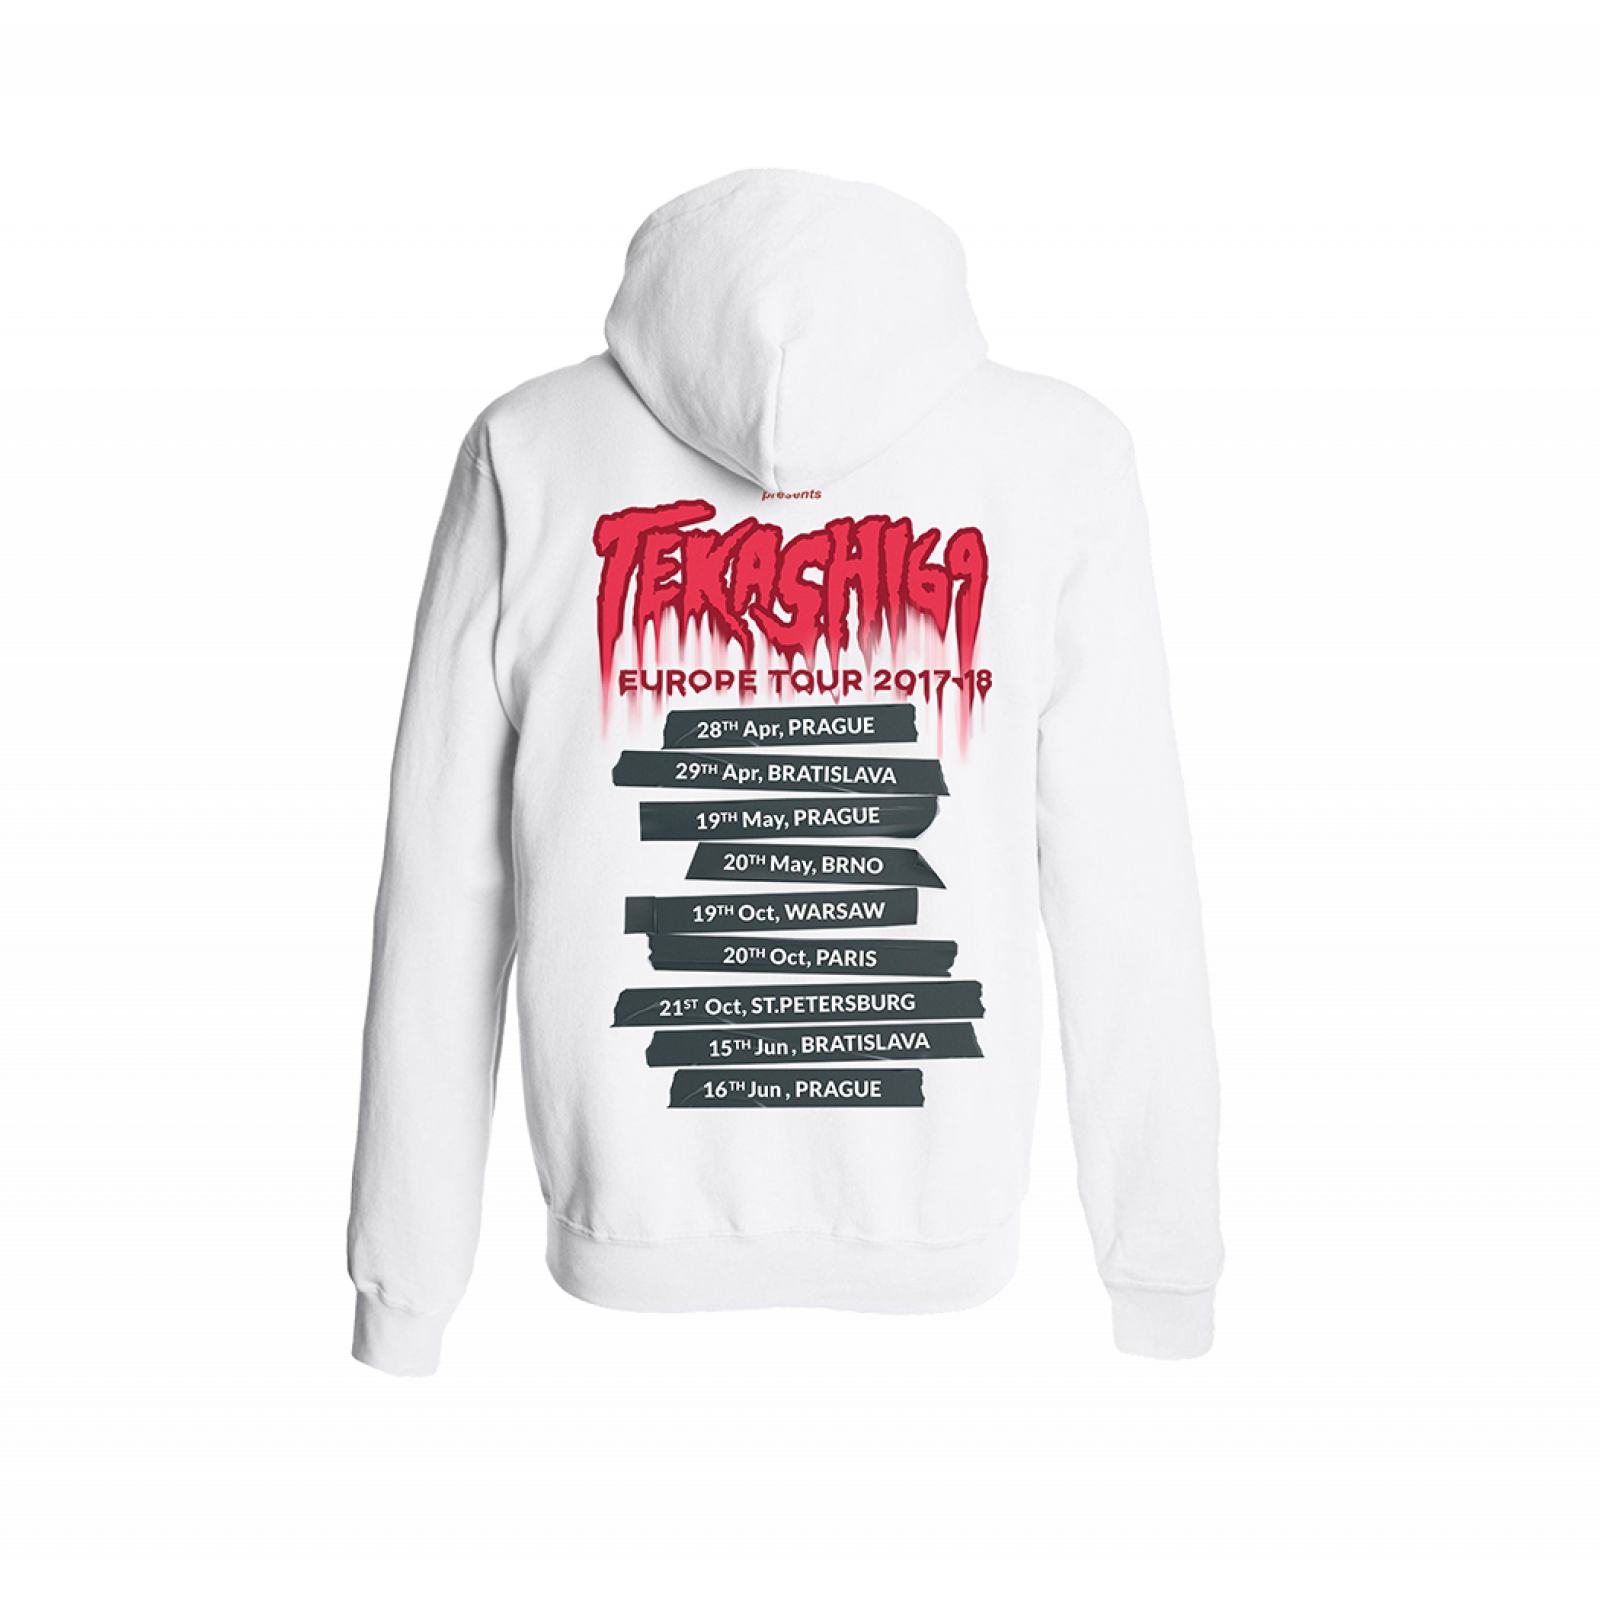 affix Say aside price 6ix9ine x @yakshovica hoodie | F*CKTHEM OFFICIAL STORE